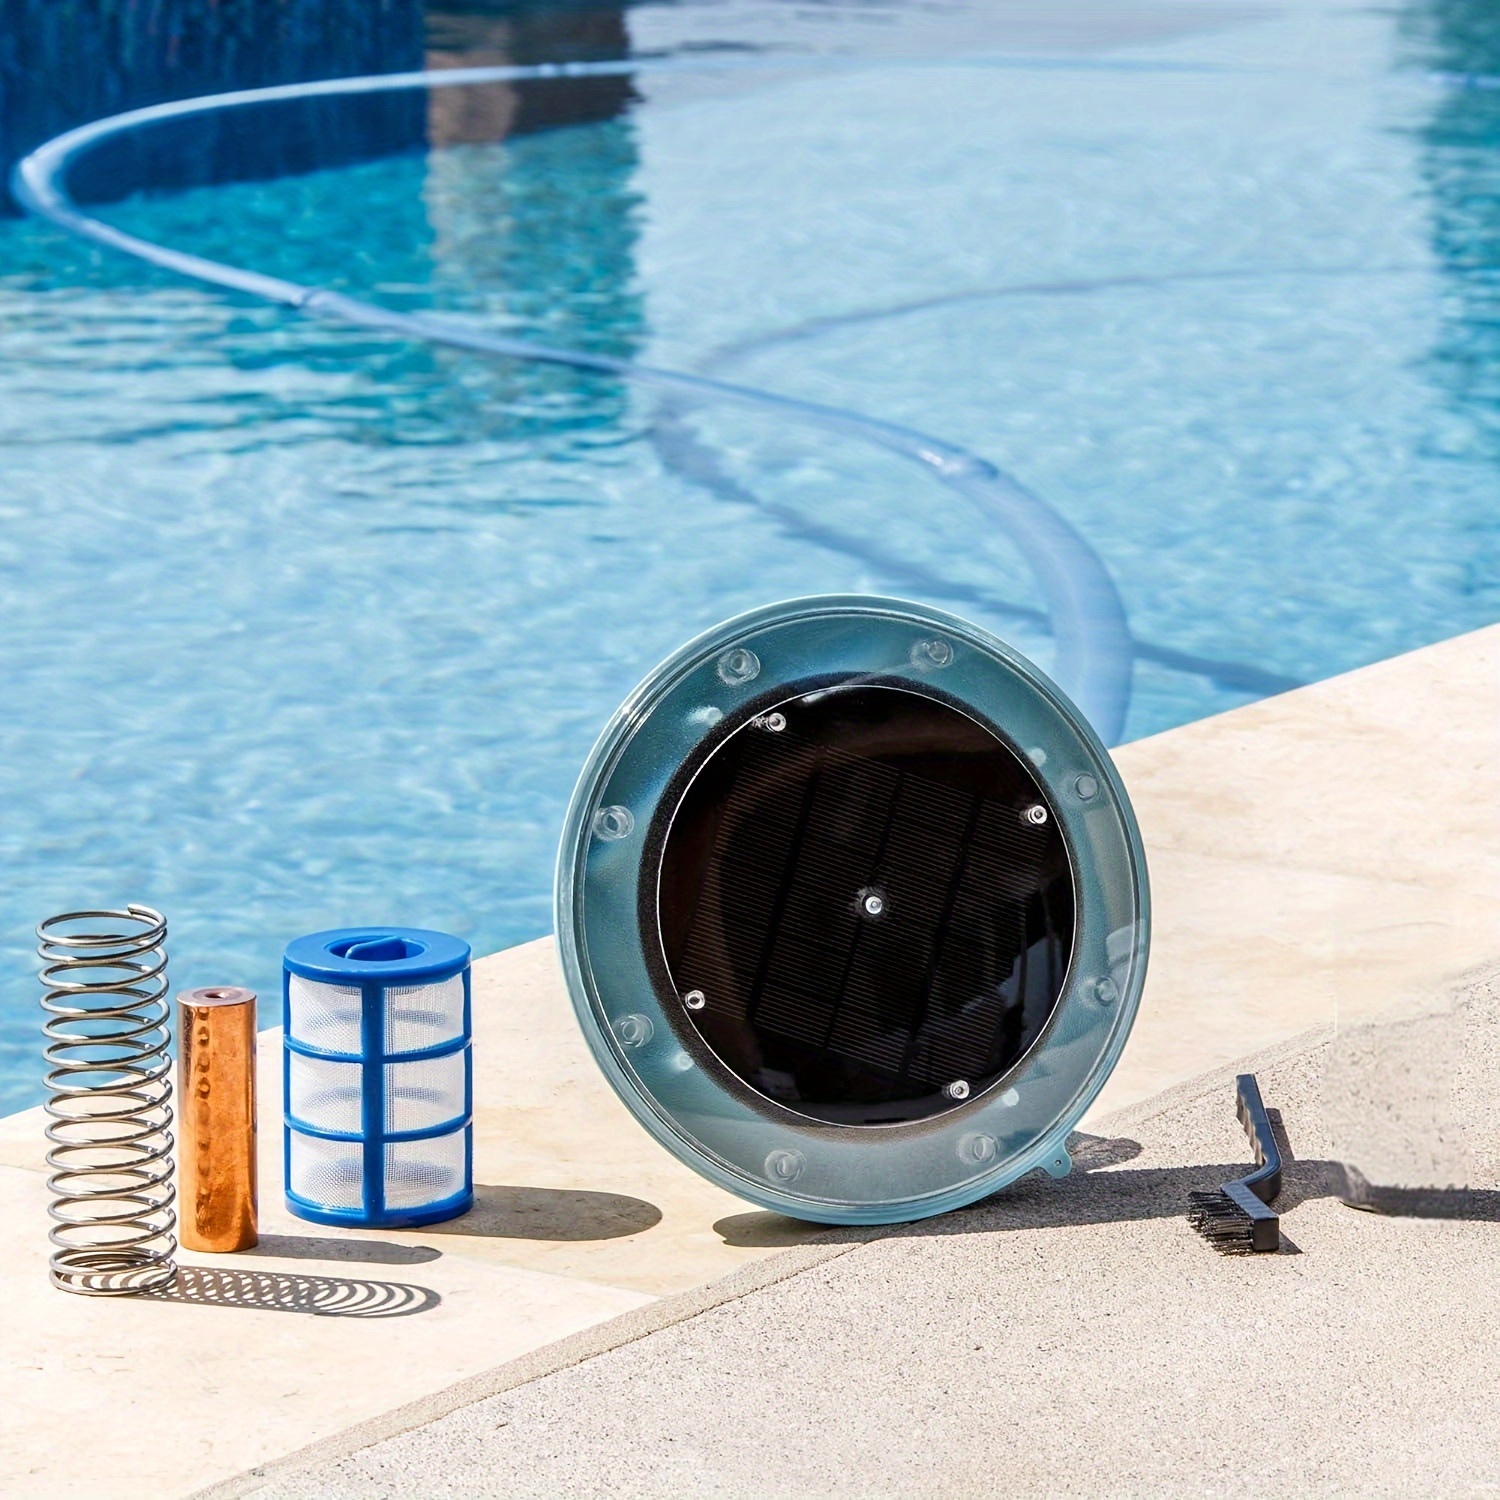 

Solar Pool Ionizer, Floating Water Cleaner And Purifier Keeps Water Clear, 85% Less Chlorine, Pool Ionizer Solar Powered